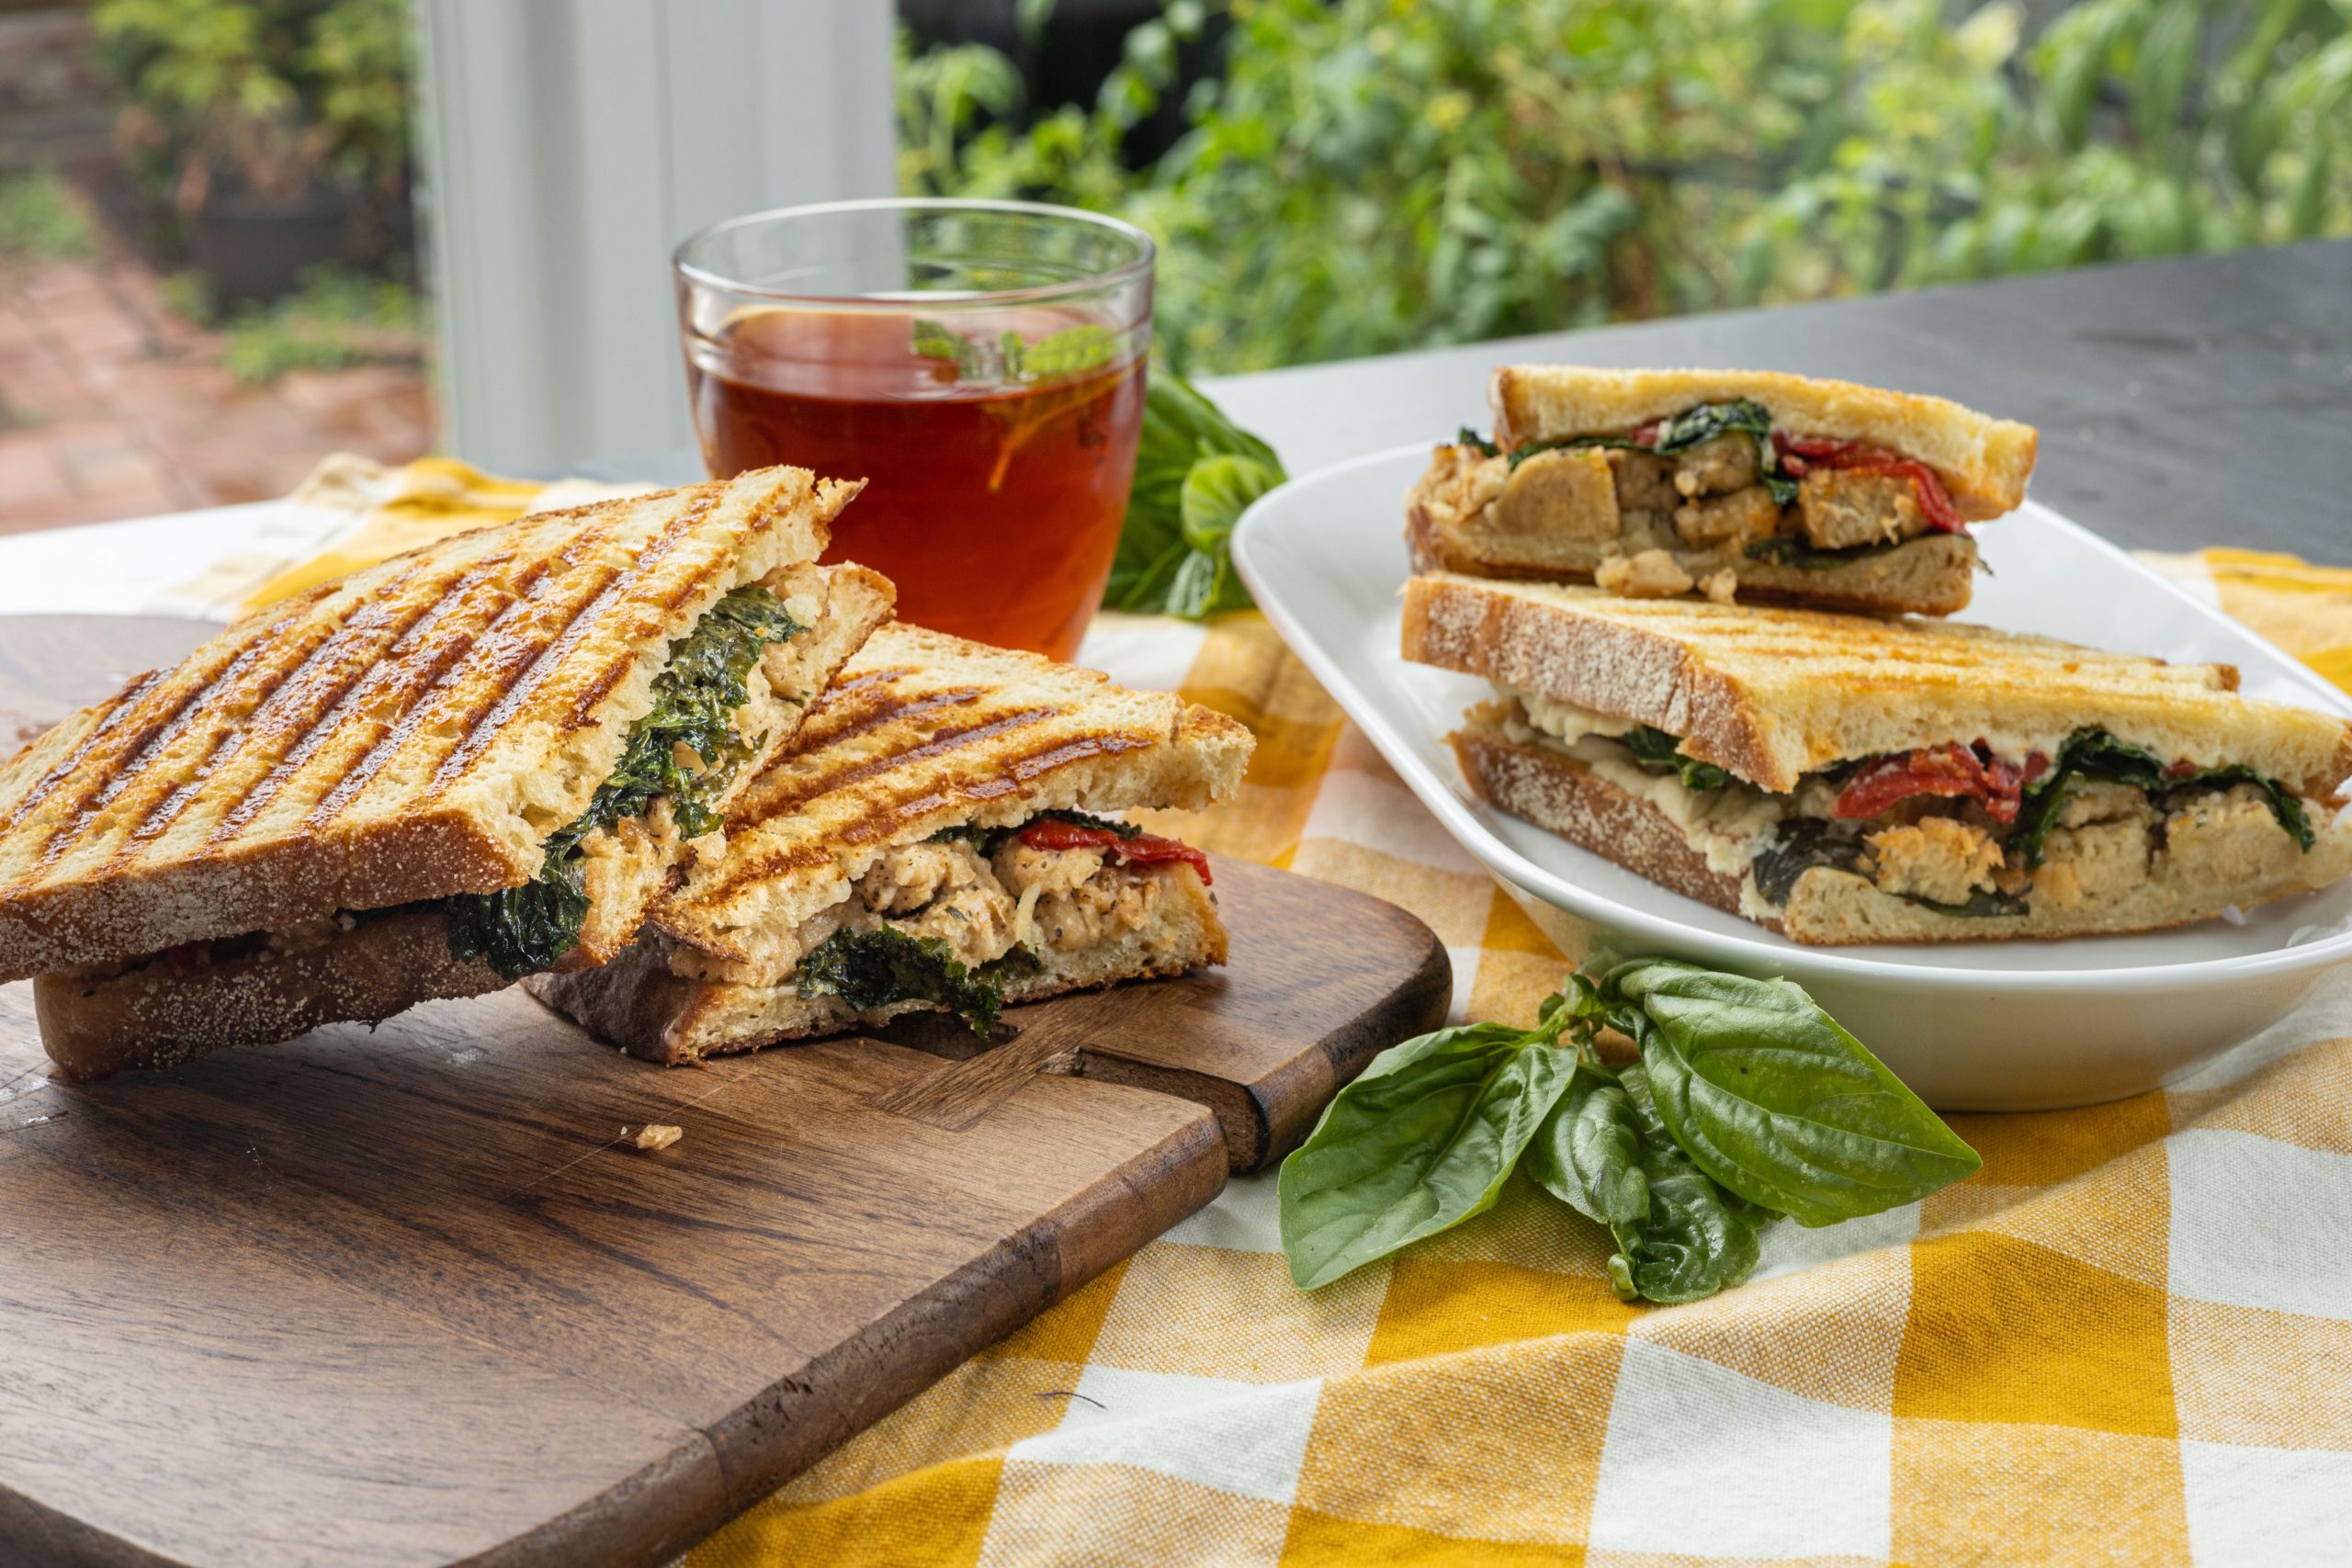 Chicken Panini with Kale & Red Peppers